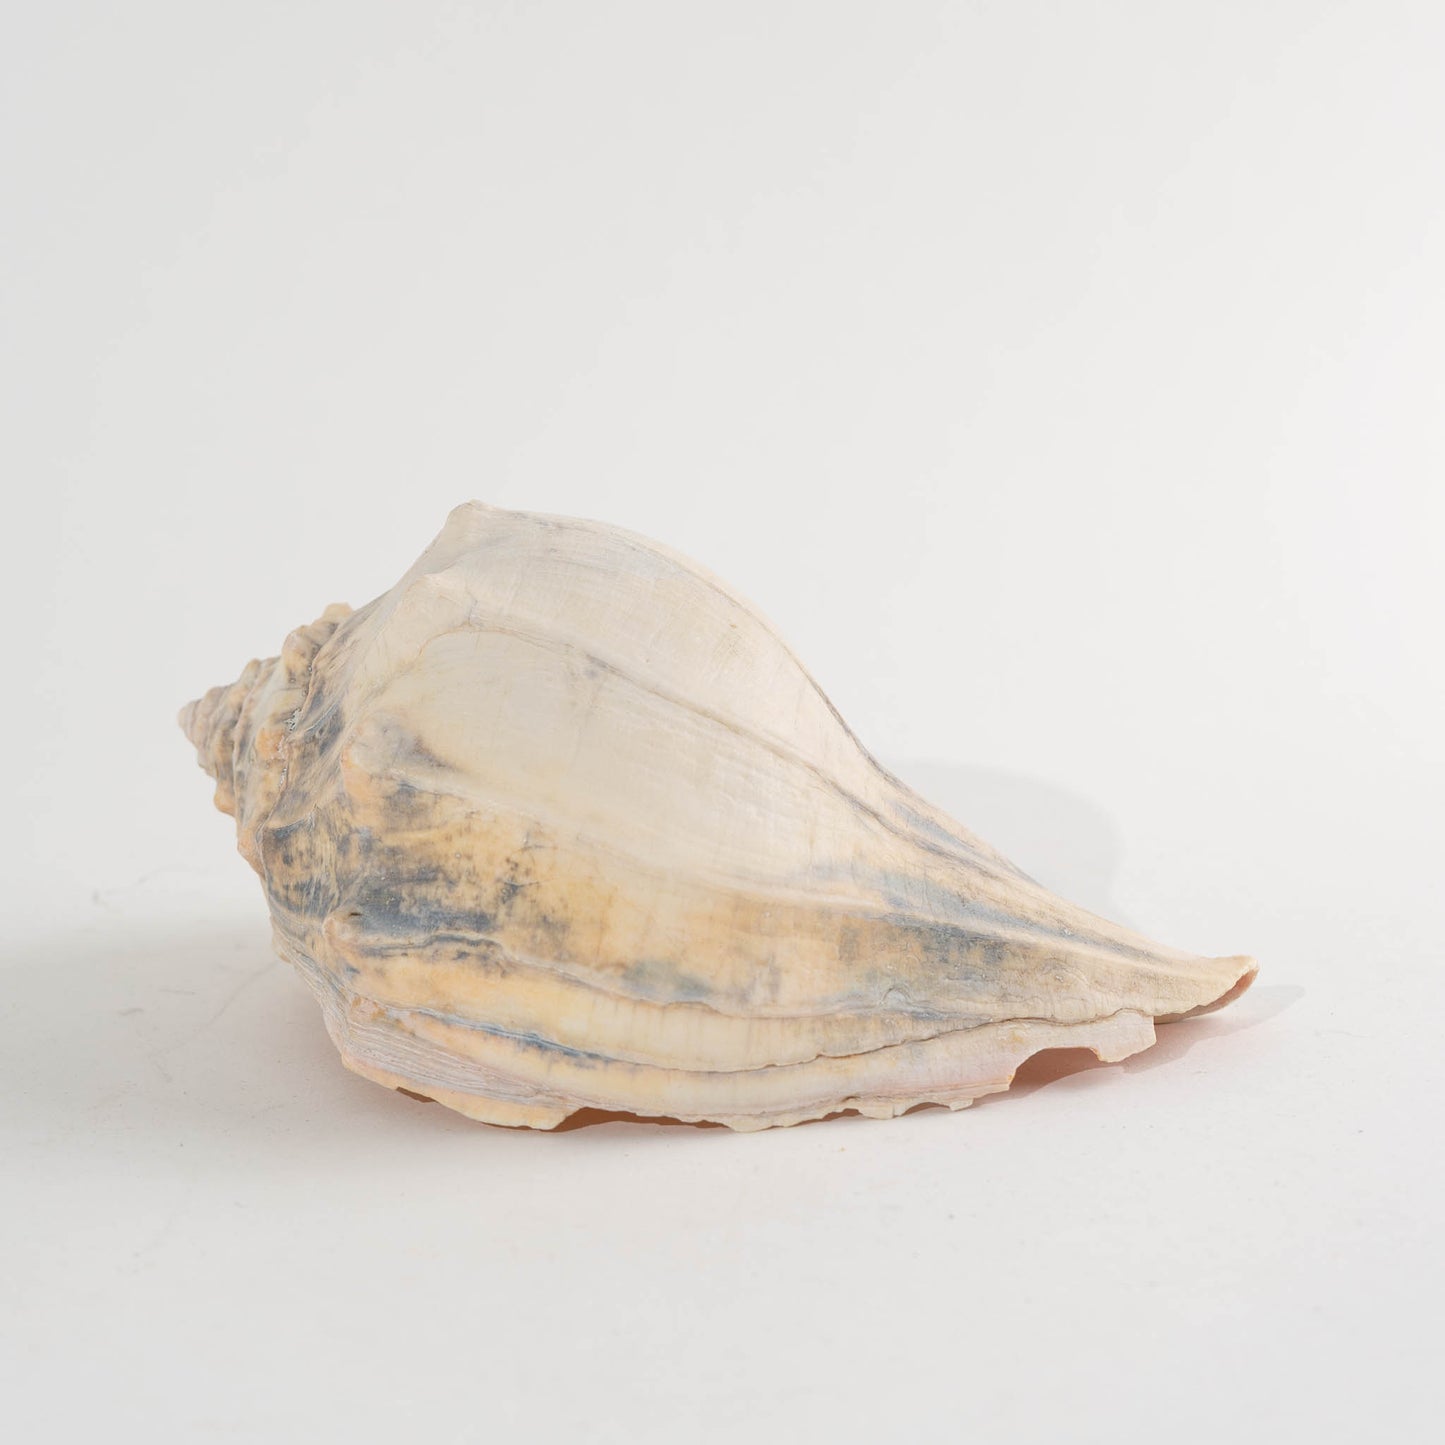 Load image into Gallery viewer, Vintage Natural Conch Shell Specimen - Coastal
